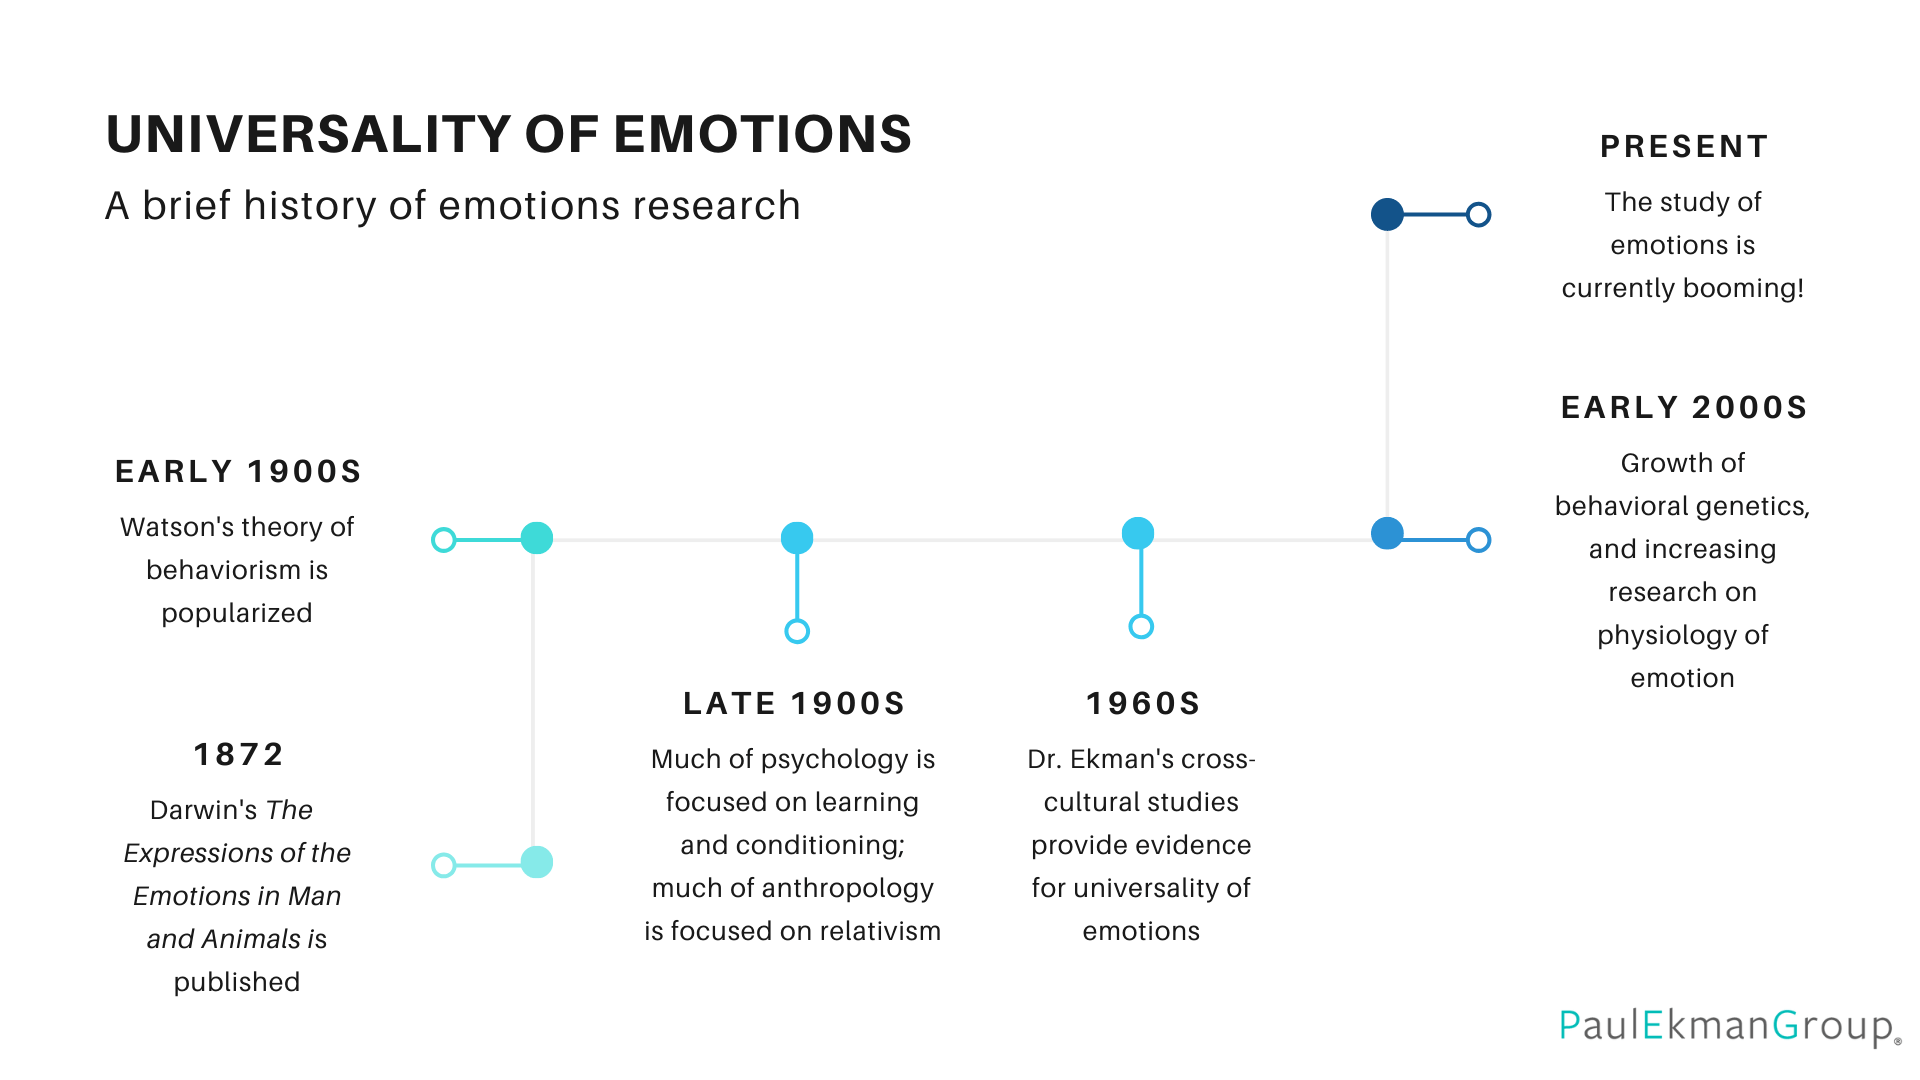 Universality of Emotions | History of Emotions | Paul Ekman Group